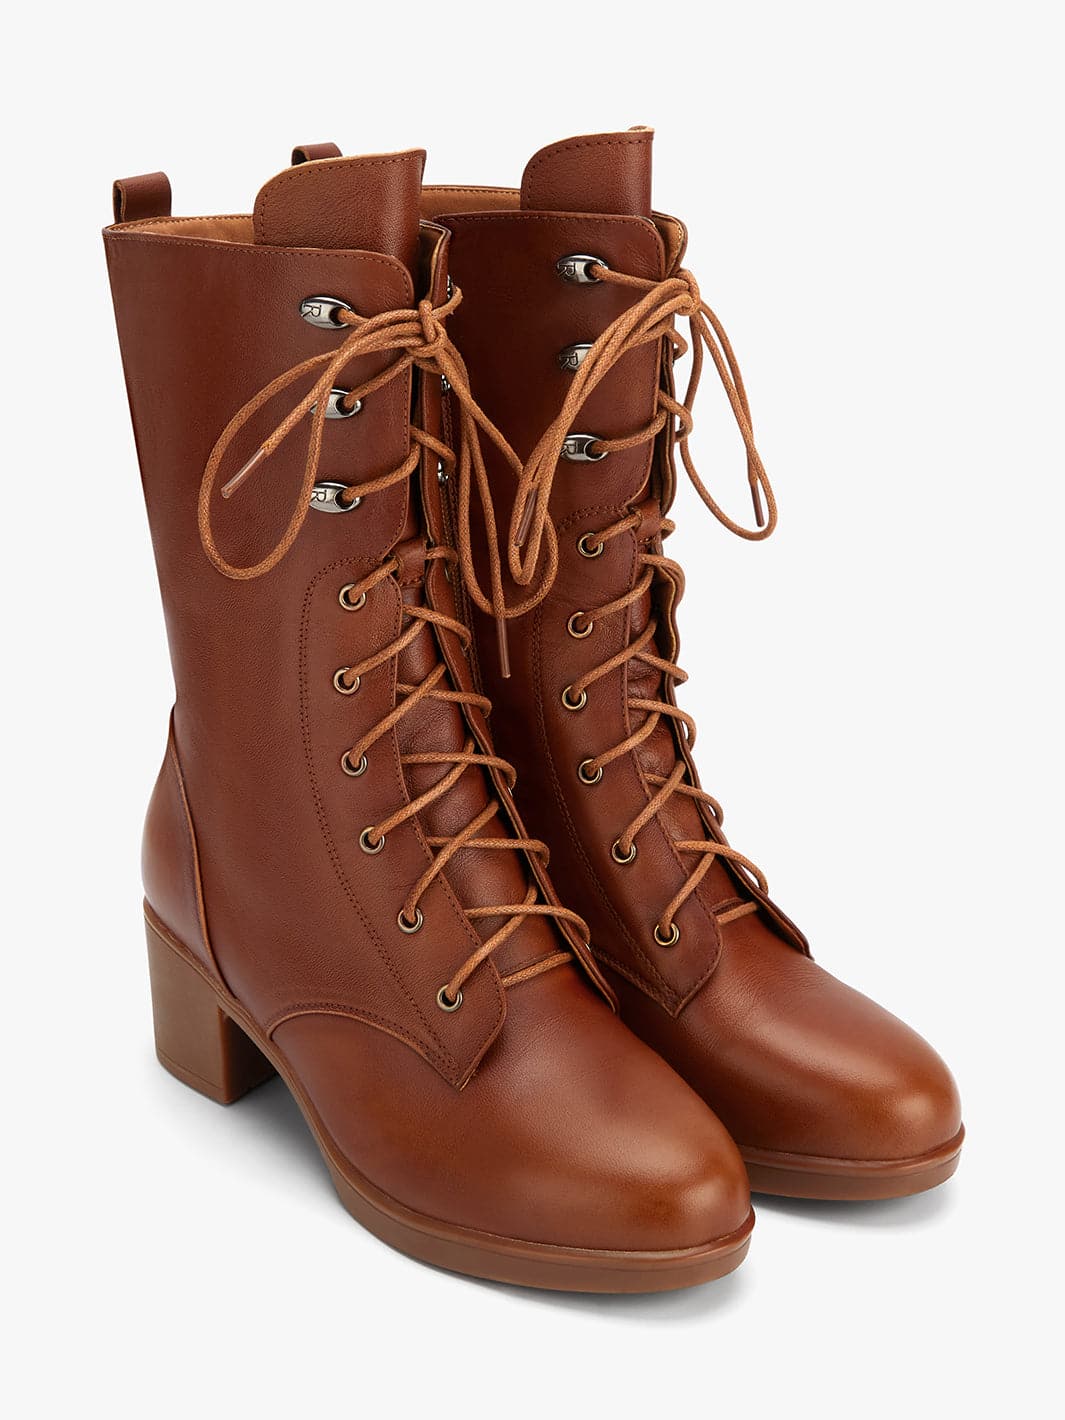 Girls Vintage Lace Up Boot Brown Now in Stock